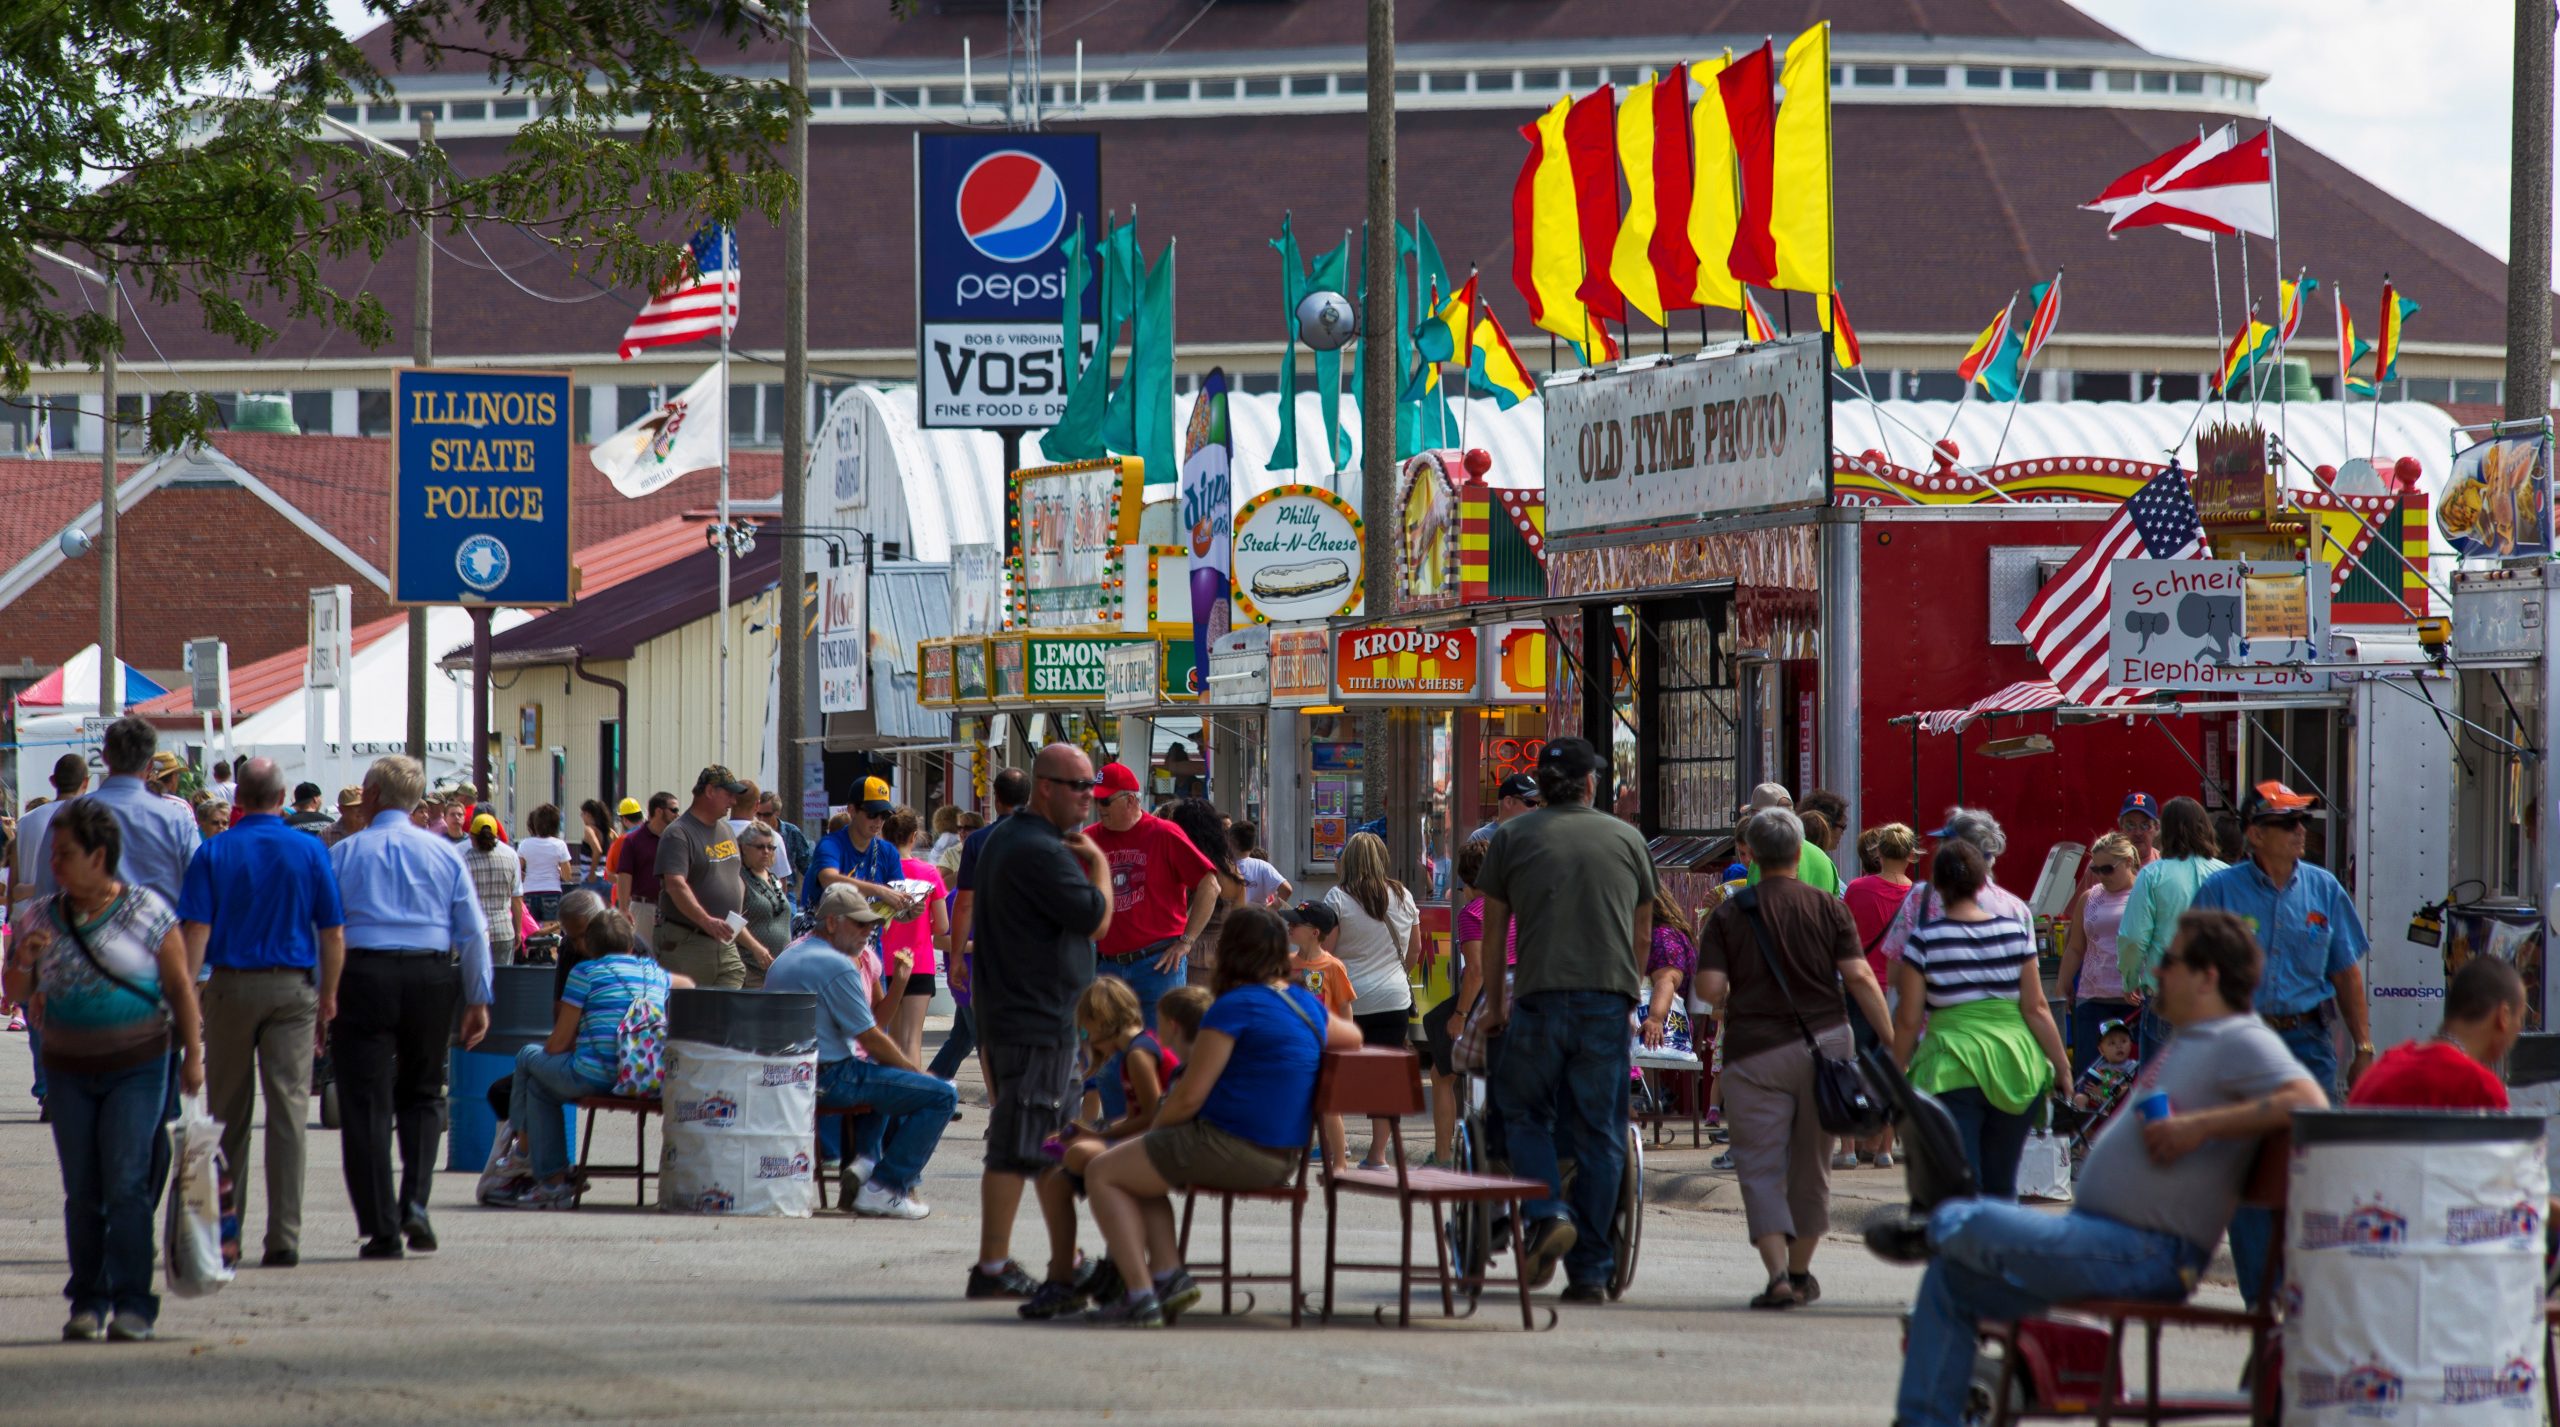 The Illinois State Fair is Around the Corner - Mike Coffey